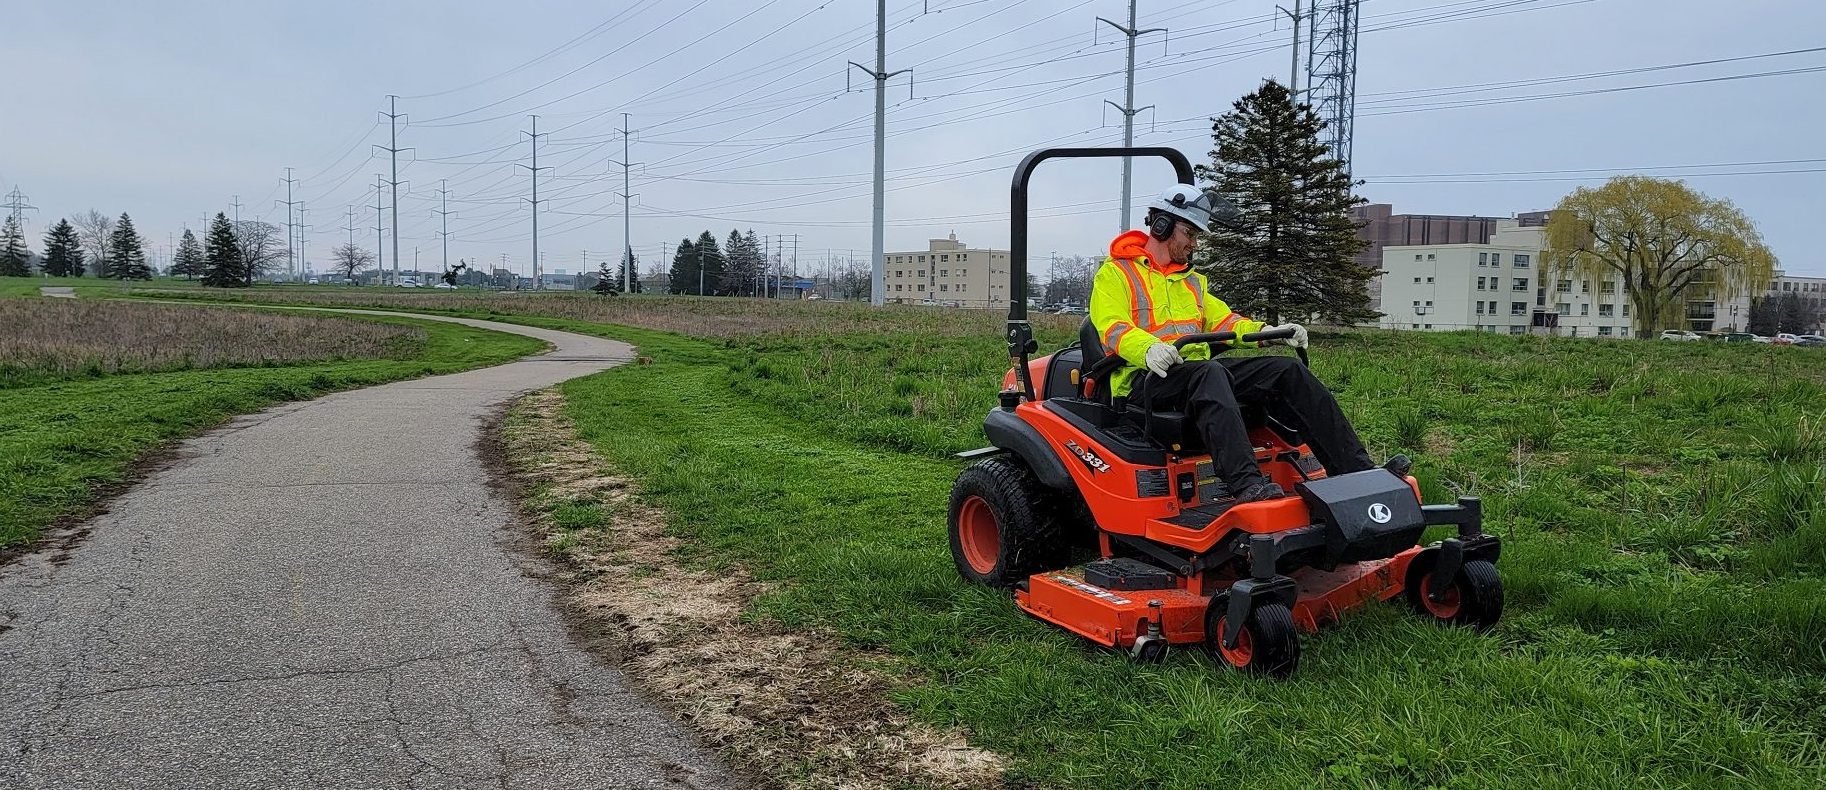 TRCA Meadoway restoration staff mow the turfgrass around the meadow footprint to maintain sightlines along the trail and reduce the spread of invasive species